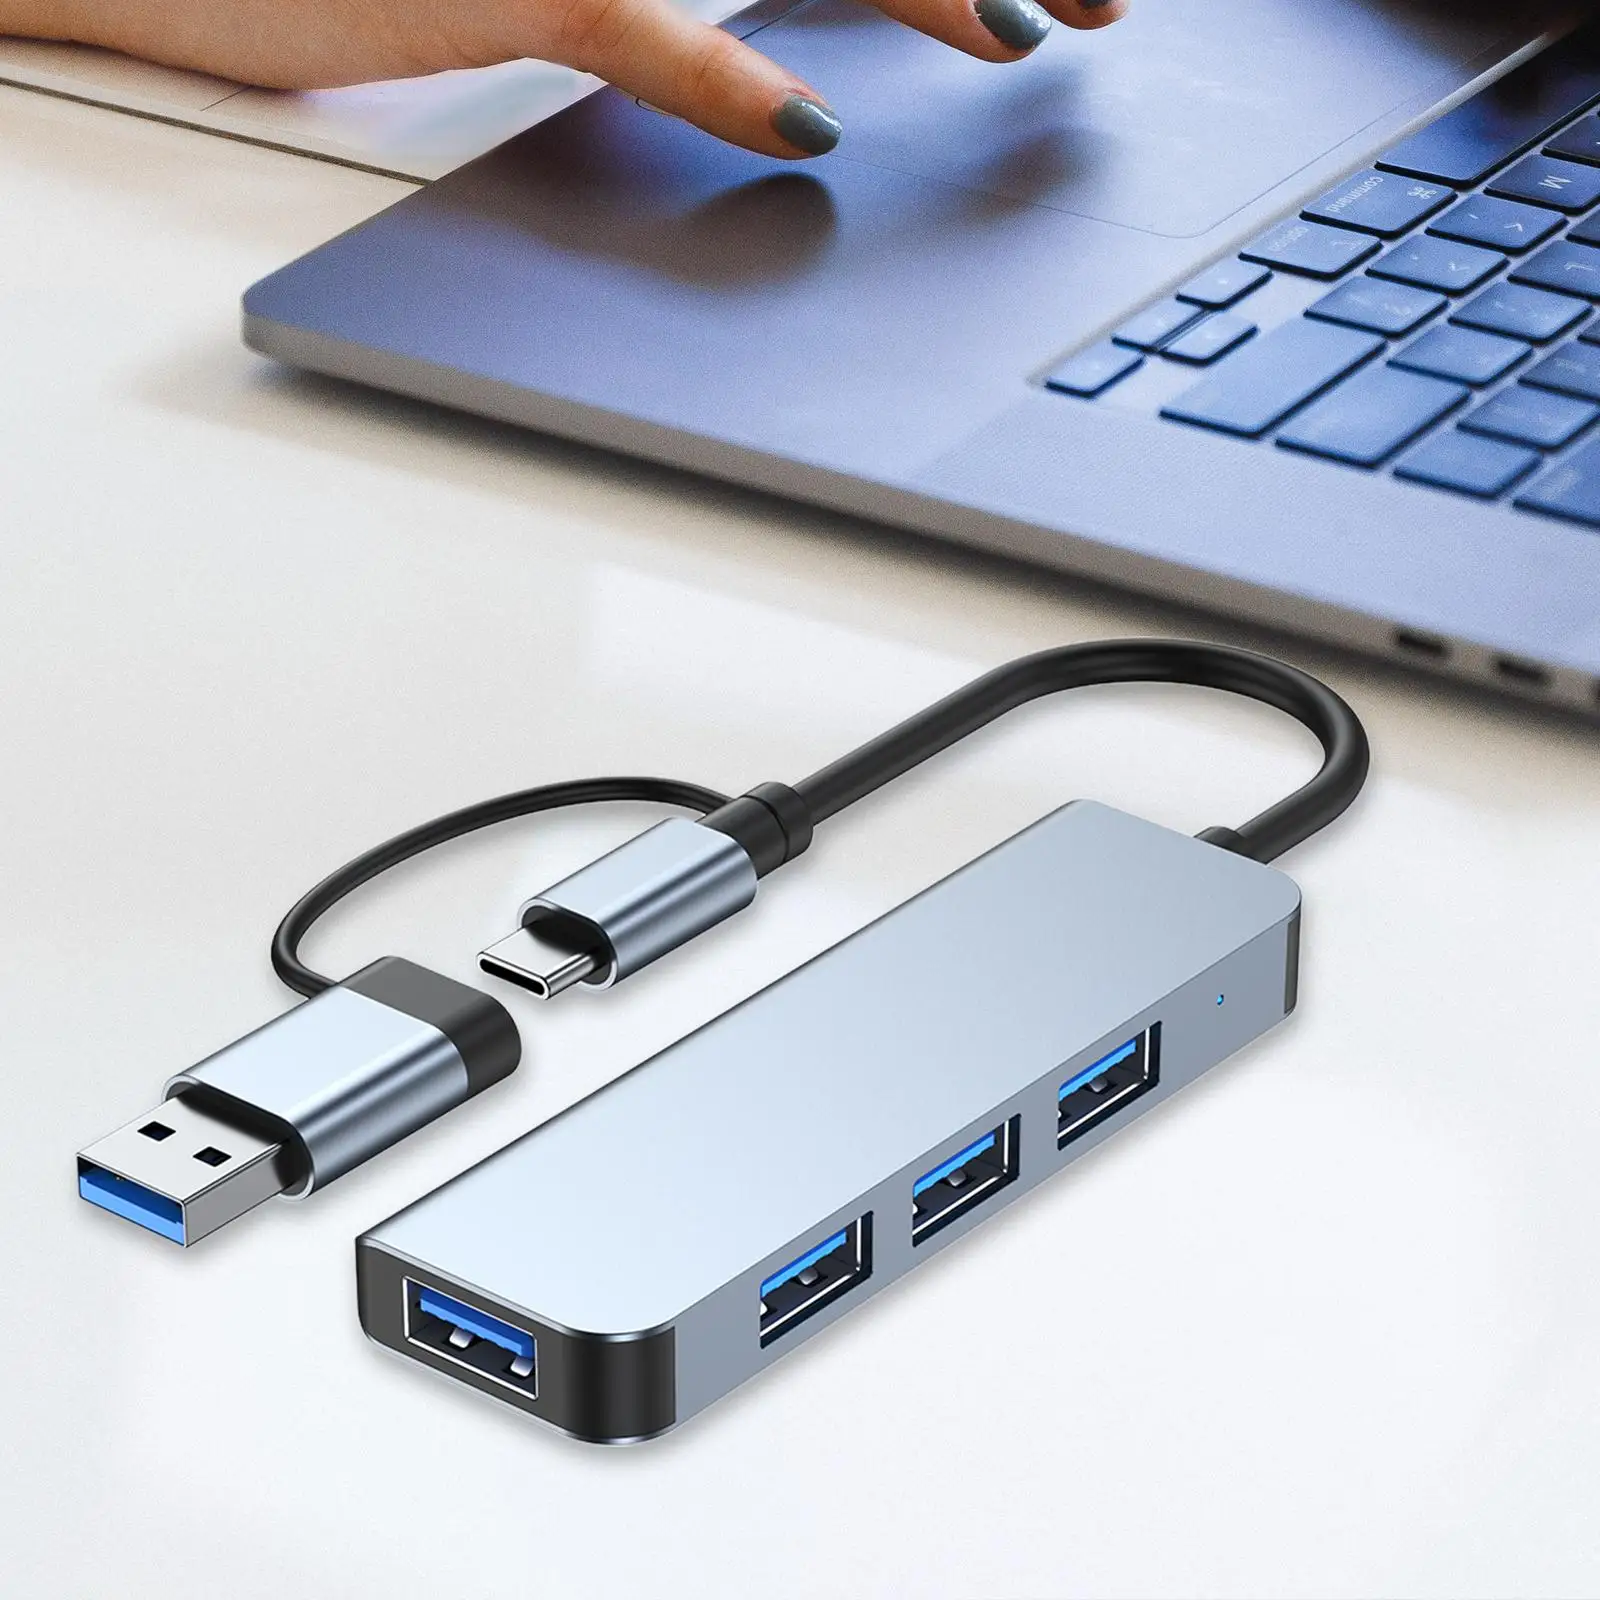 USB 3.0 Hub Data Converter Adapter Expansion for Notebook Laptop